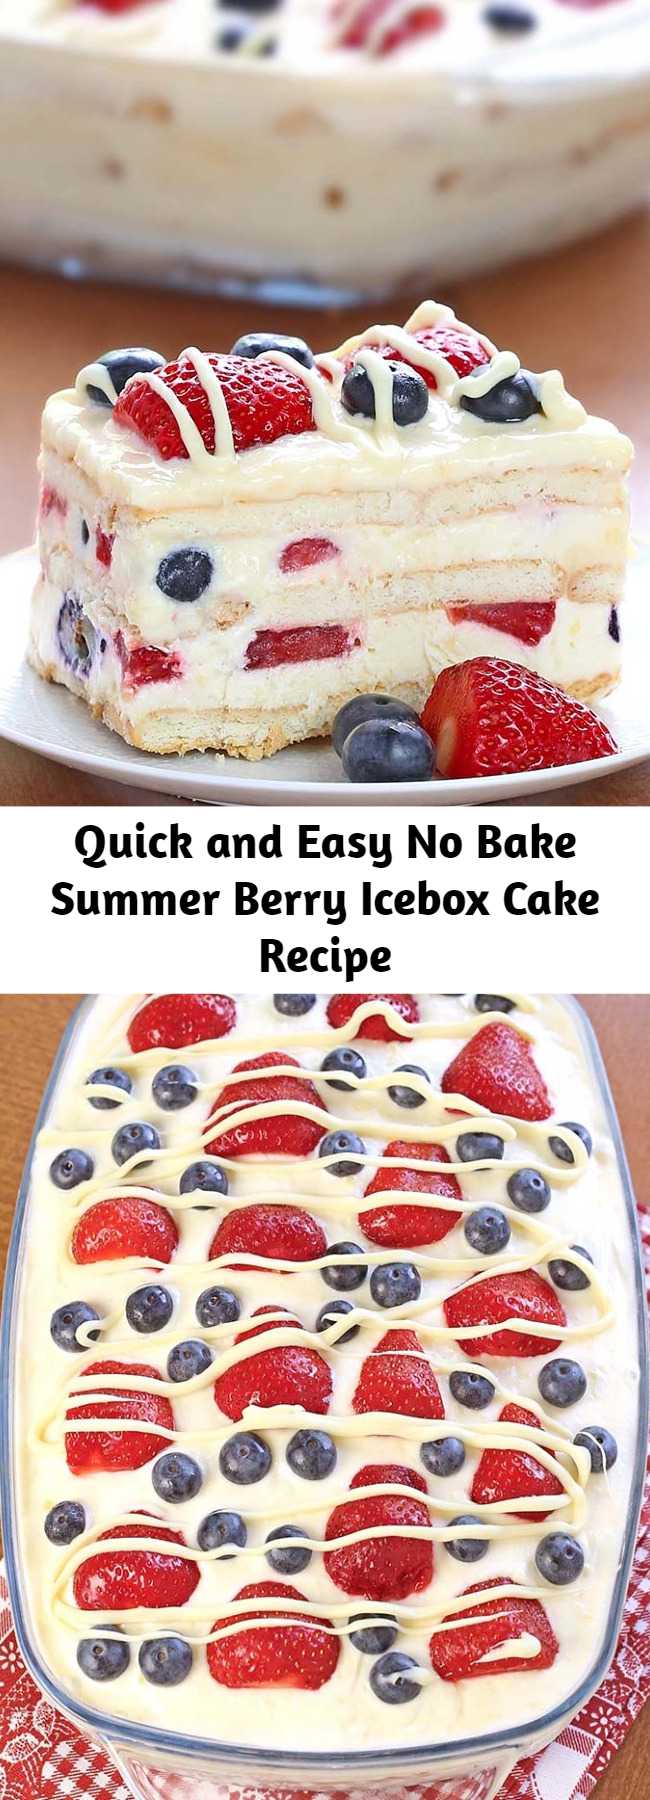 Quick and Easy No Bake Summer Berry Icebox Cake Recipe - Looking for a quick and easy Summer dessert recipe? Try out delicious No Bake Summer Berry Icebox Cake! There’s very little preparation involved in this recipe, which makes it great for hot summer days or for crazy busy days. You can throw it together whenever you have time (even the day before is fine) and it will be ready and waiting for you in the refrigerator when you want a sweet treat!